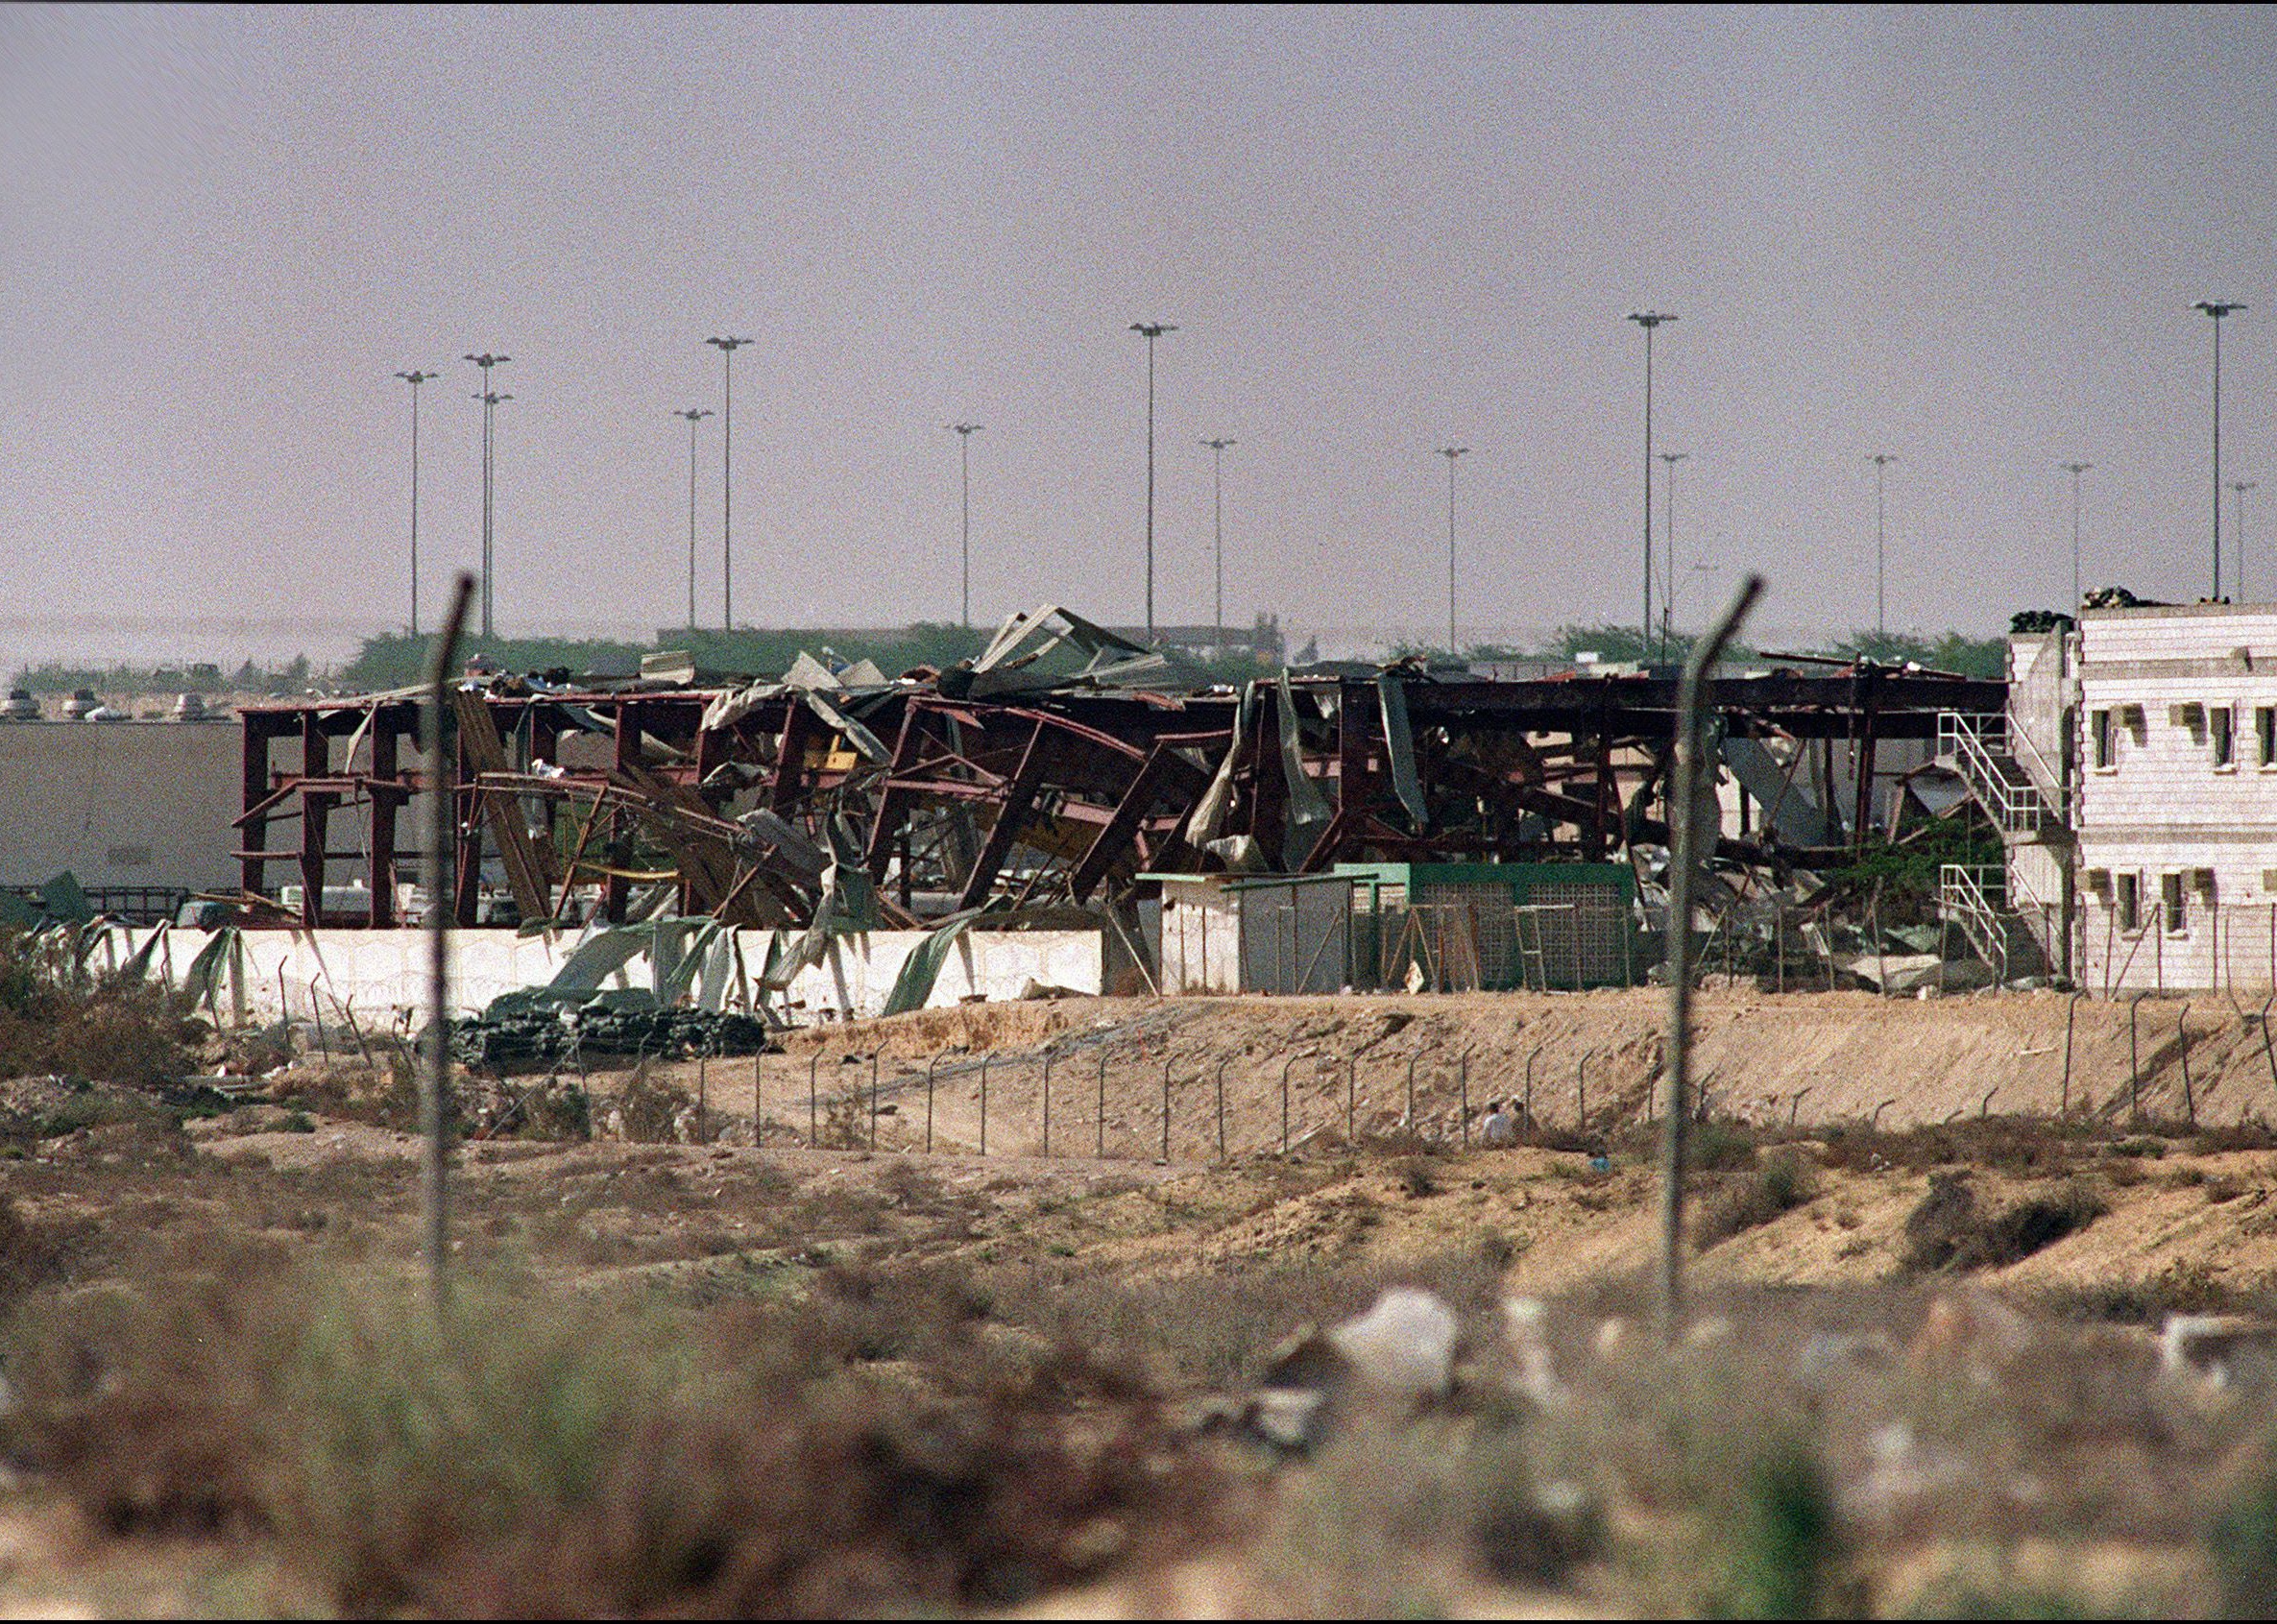 The U.S. Army barracks that was hit by Iraqi Scud missile debris.